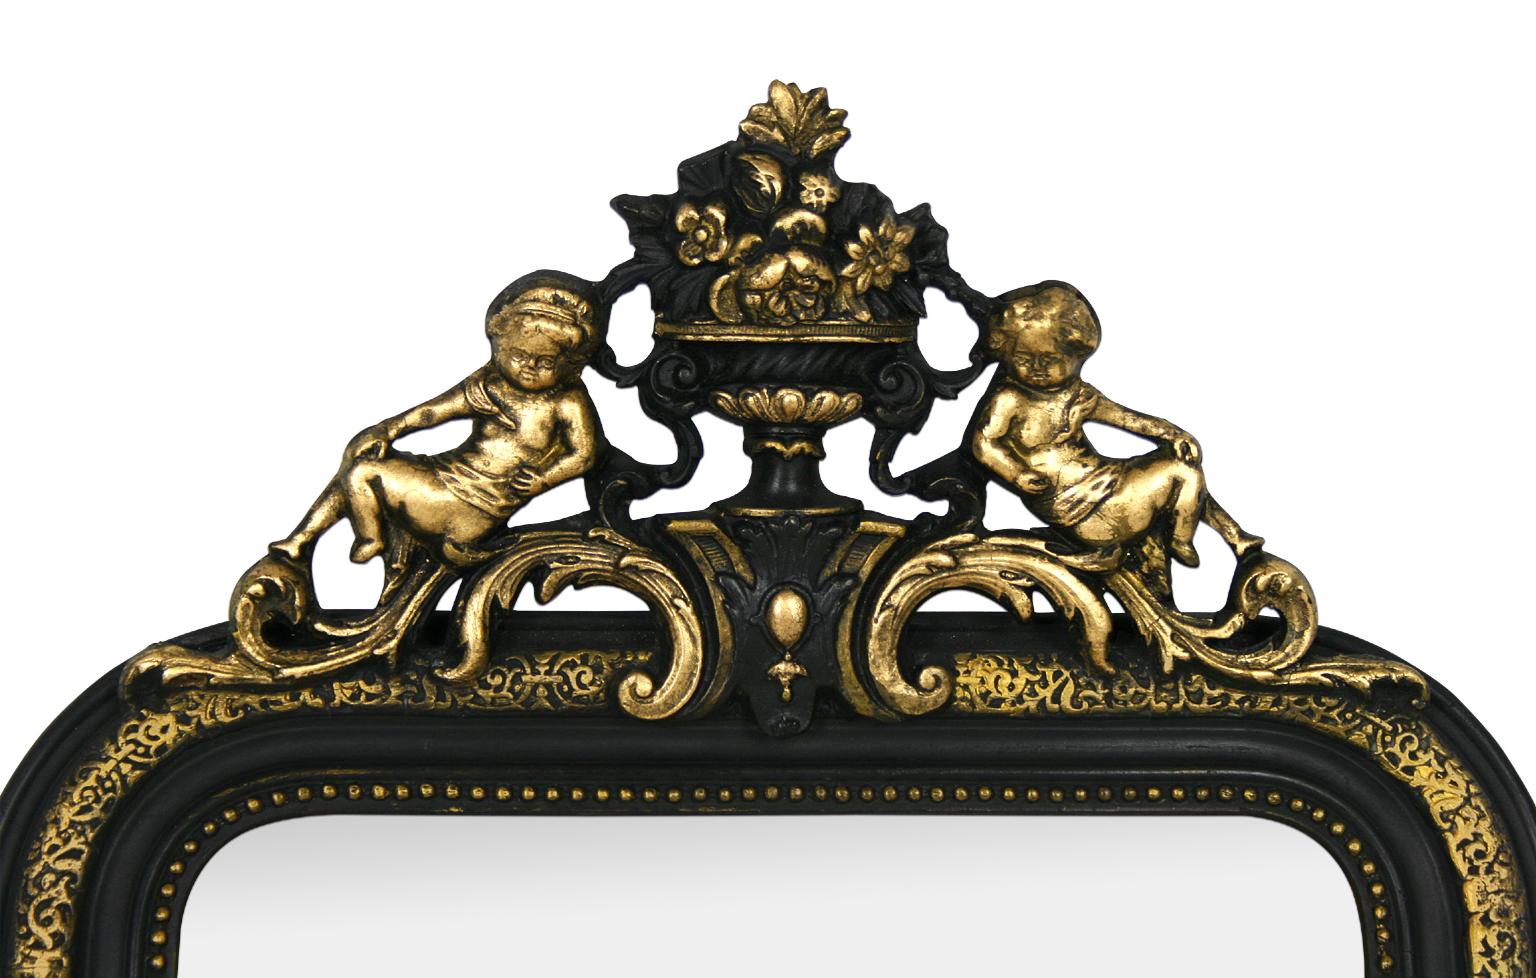 French antique mirror, Napoleon III style. Black painted and gilding to the leaf with pediment ornamented angels and flowers, decorated of pearls. Antique wood back. Modern glass mirror. Antique frame width: 7 cm.